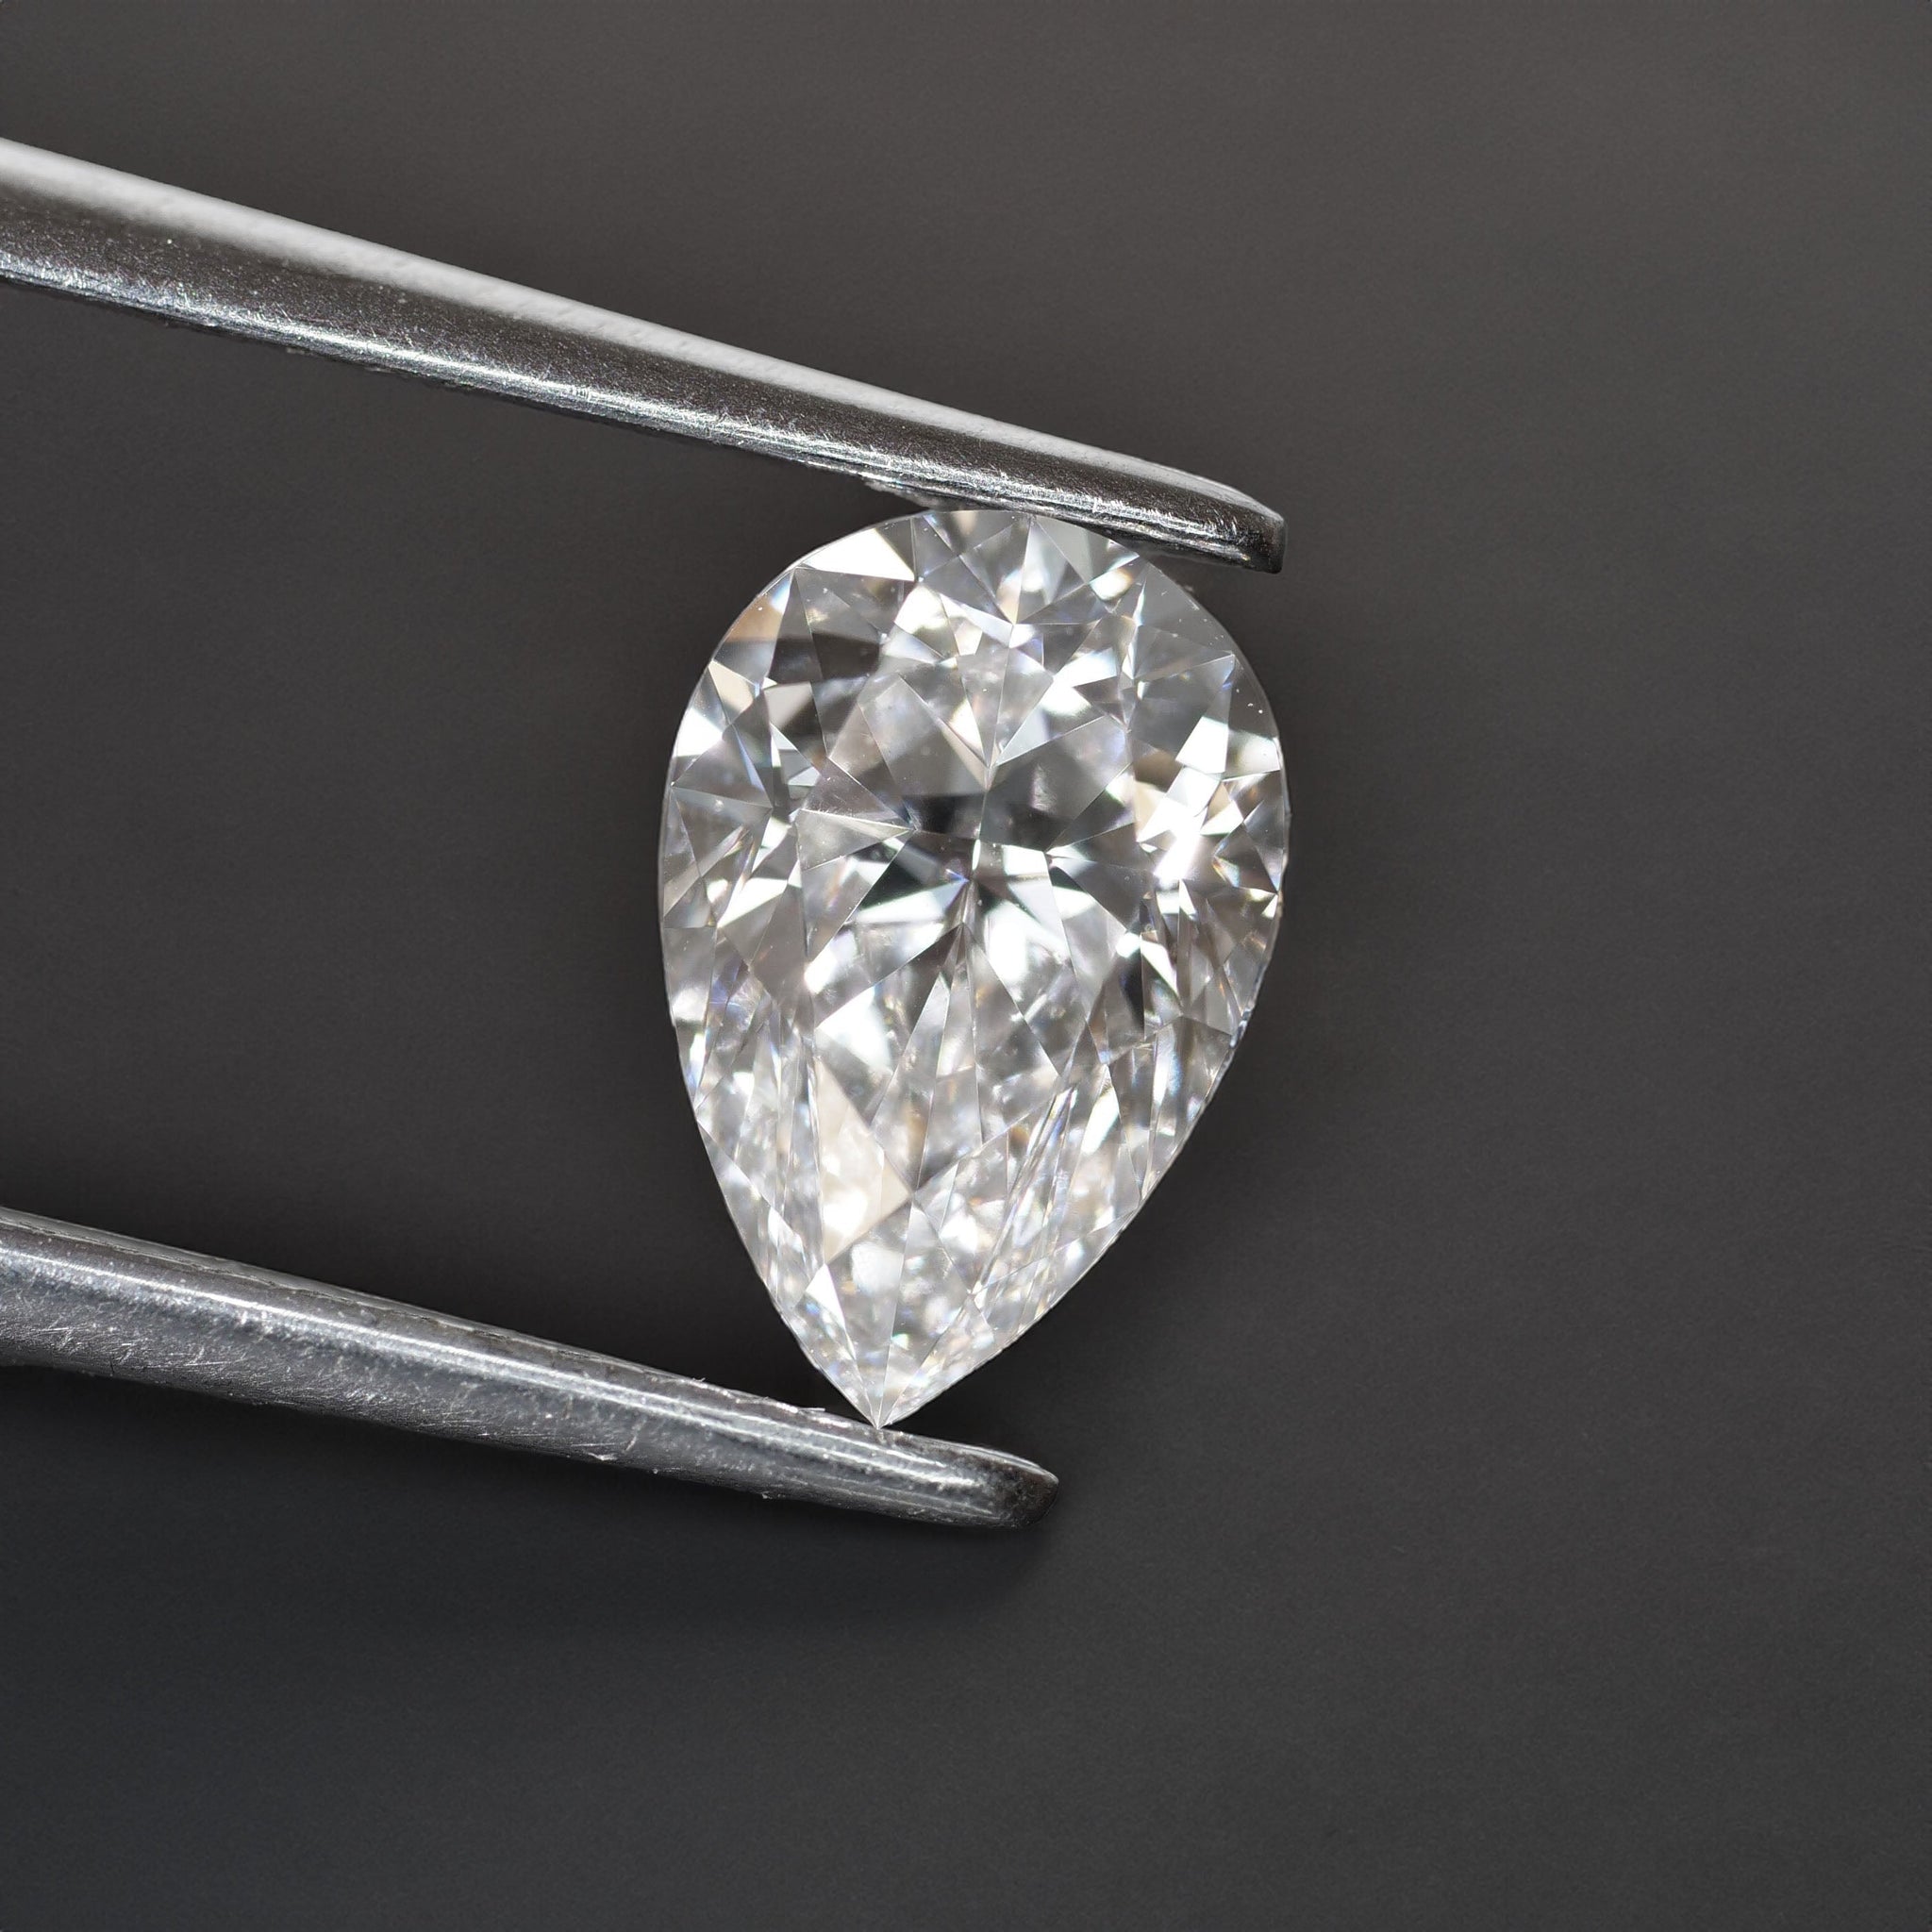 Natural diamond | GIA certified, pear cut 7x4,5 mm, F color, VS, 0.52ct - Eden Garden Jewelry™